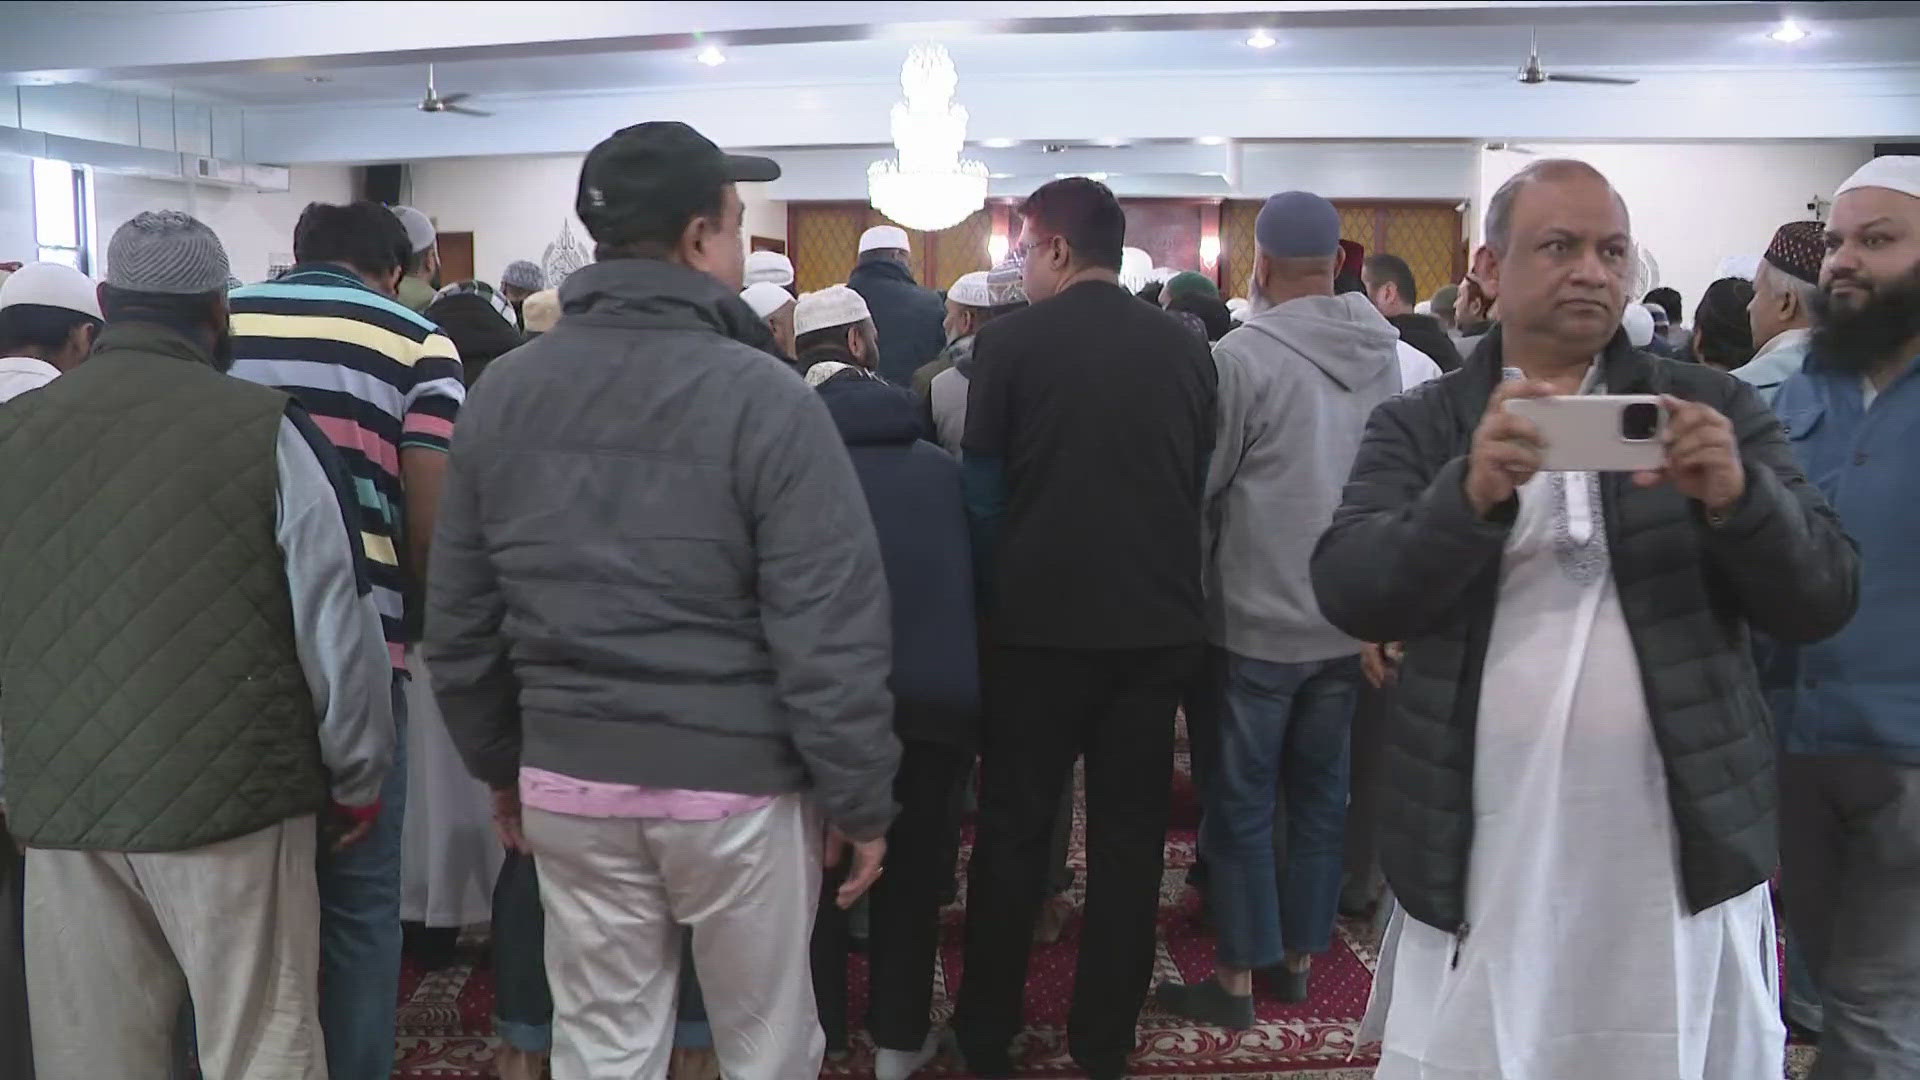 hundreds of people came out to remember the two victims of Saturday's shooting. It was a tremendous show of support here at the Buffalo Muslim Center.